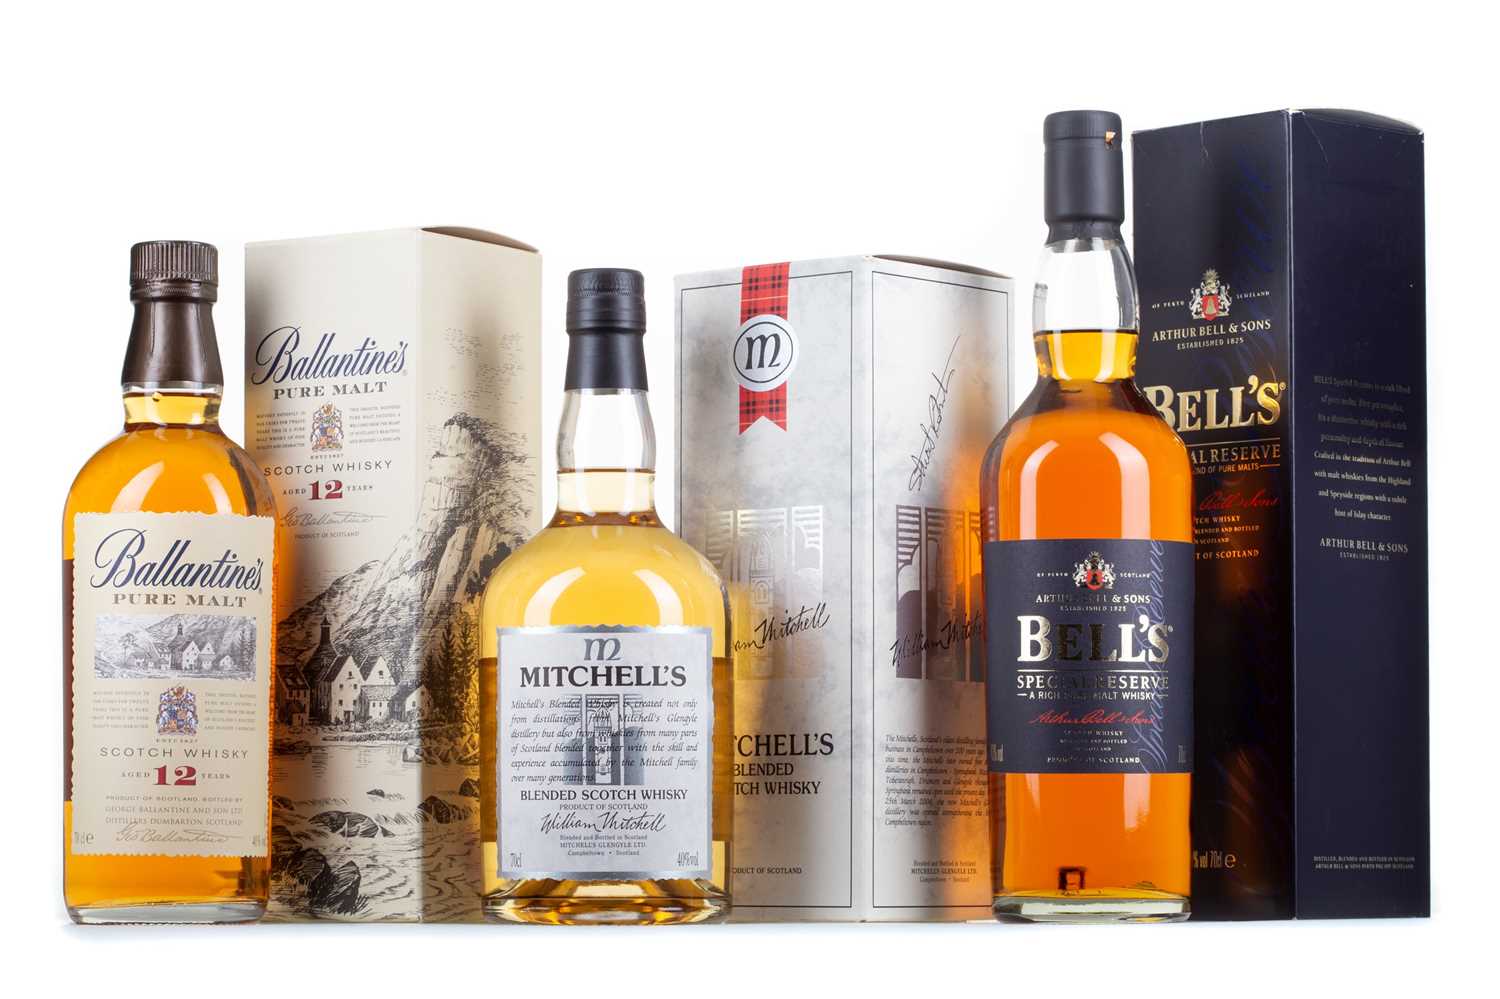 BALLANTINE'S 12 YEAR OLD PURE MALT, BELL'S SPECIAL RESERVE AND MITCHELL'S BLEND